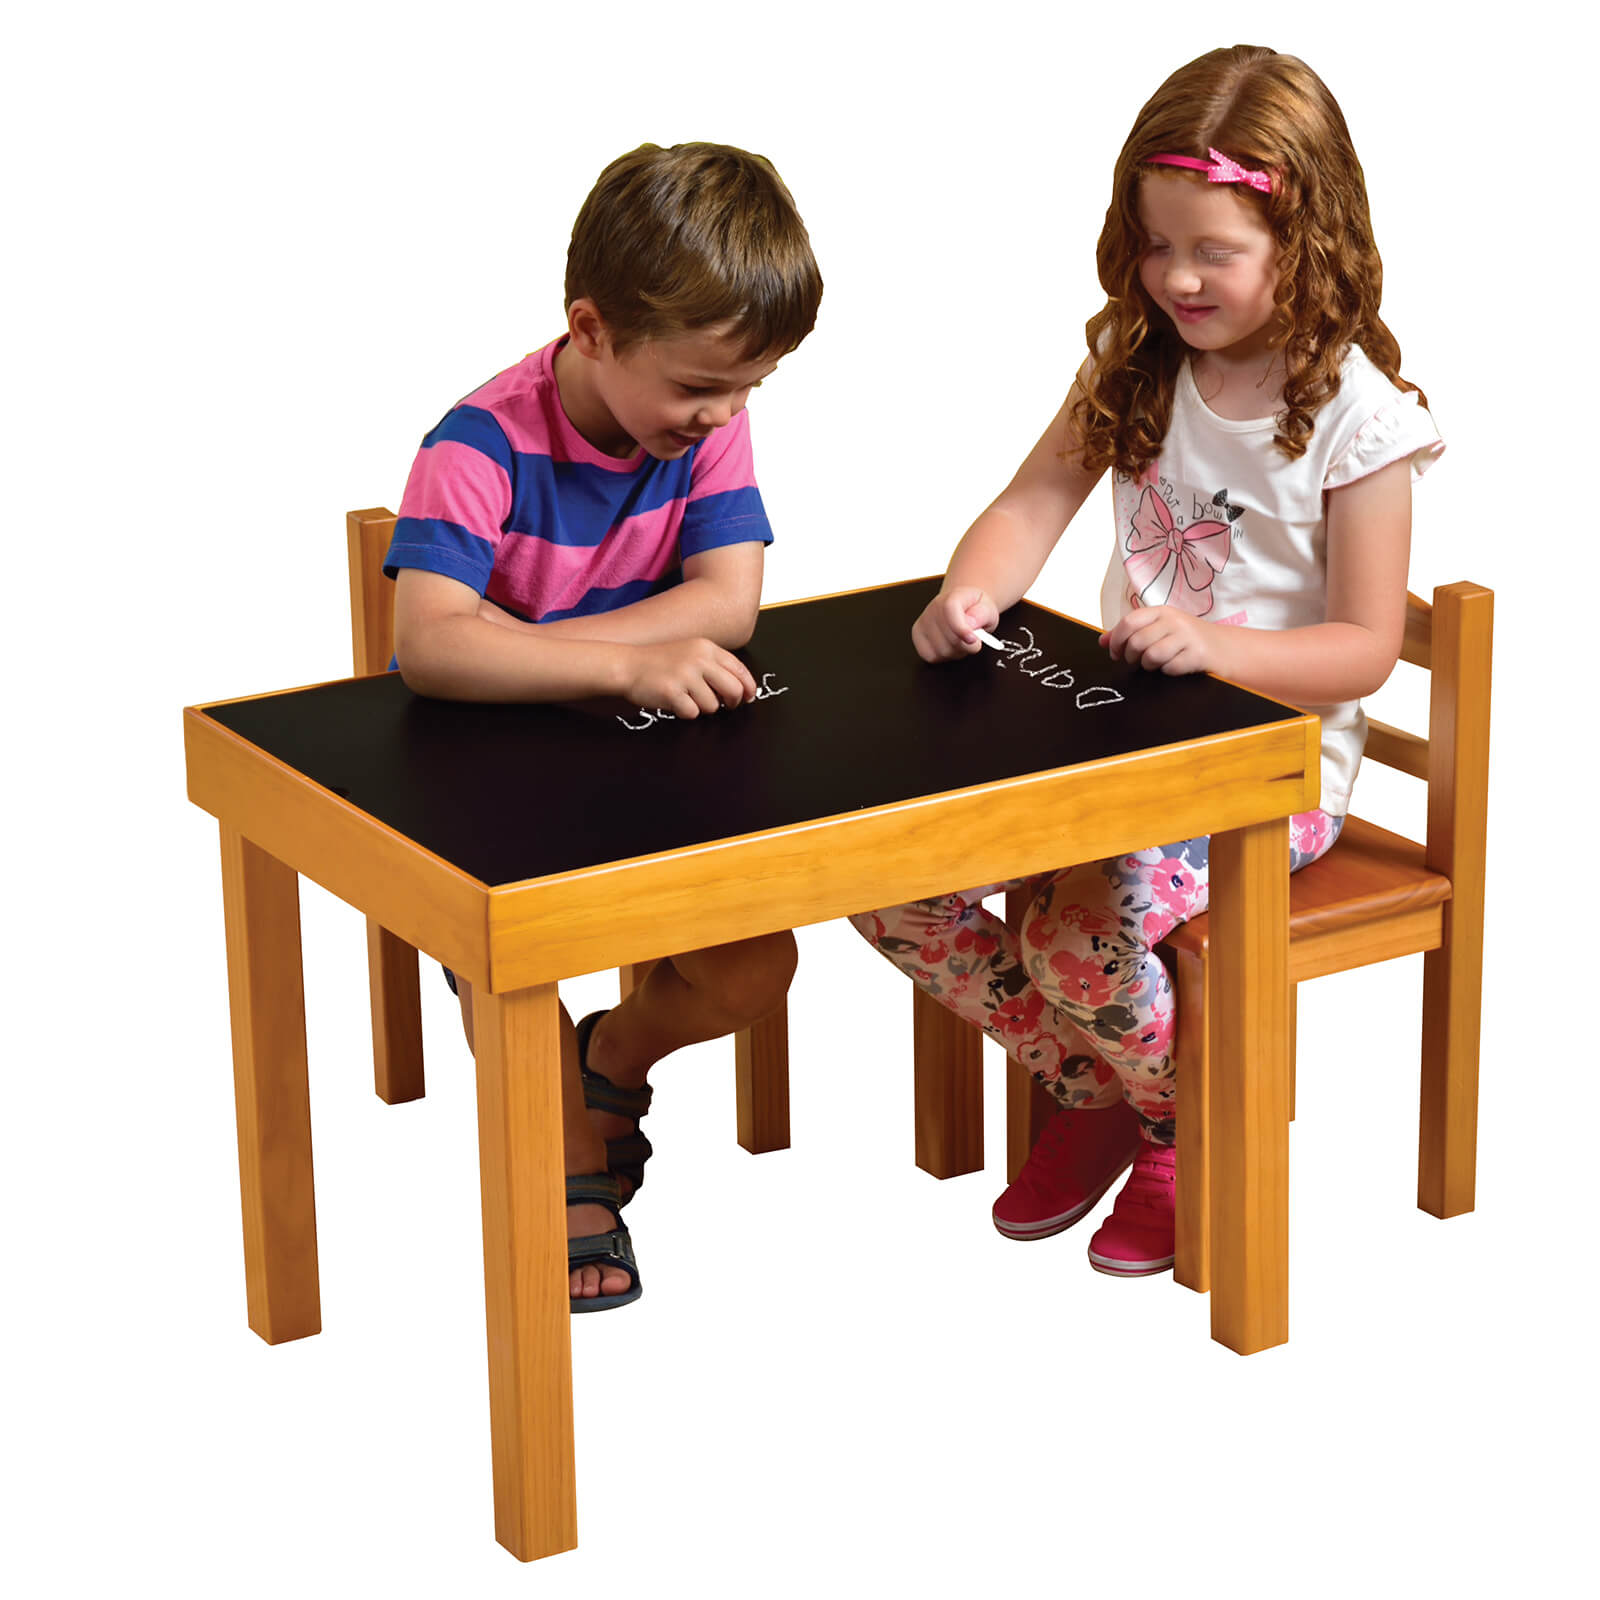 Wooden Activity Table and Chair Set